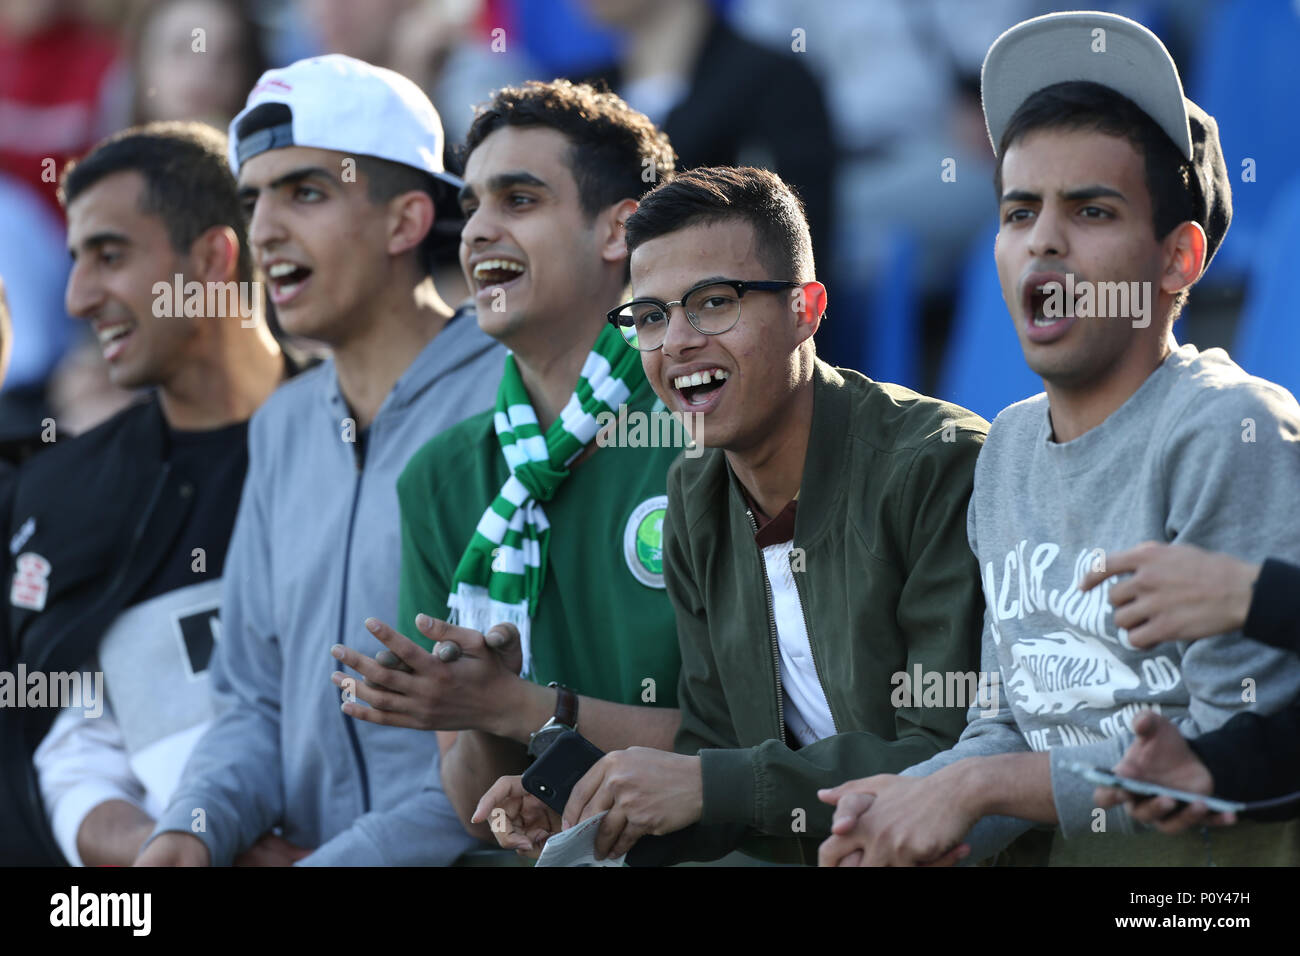 Fans of the Saudi Arabia national football team attend a training session at Petrovsky Stadium in Saint Petersburg, ahead of the Russia 2018 World Cup. Stock Photo